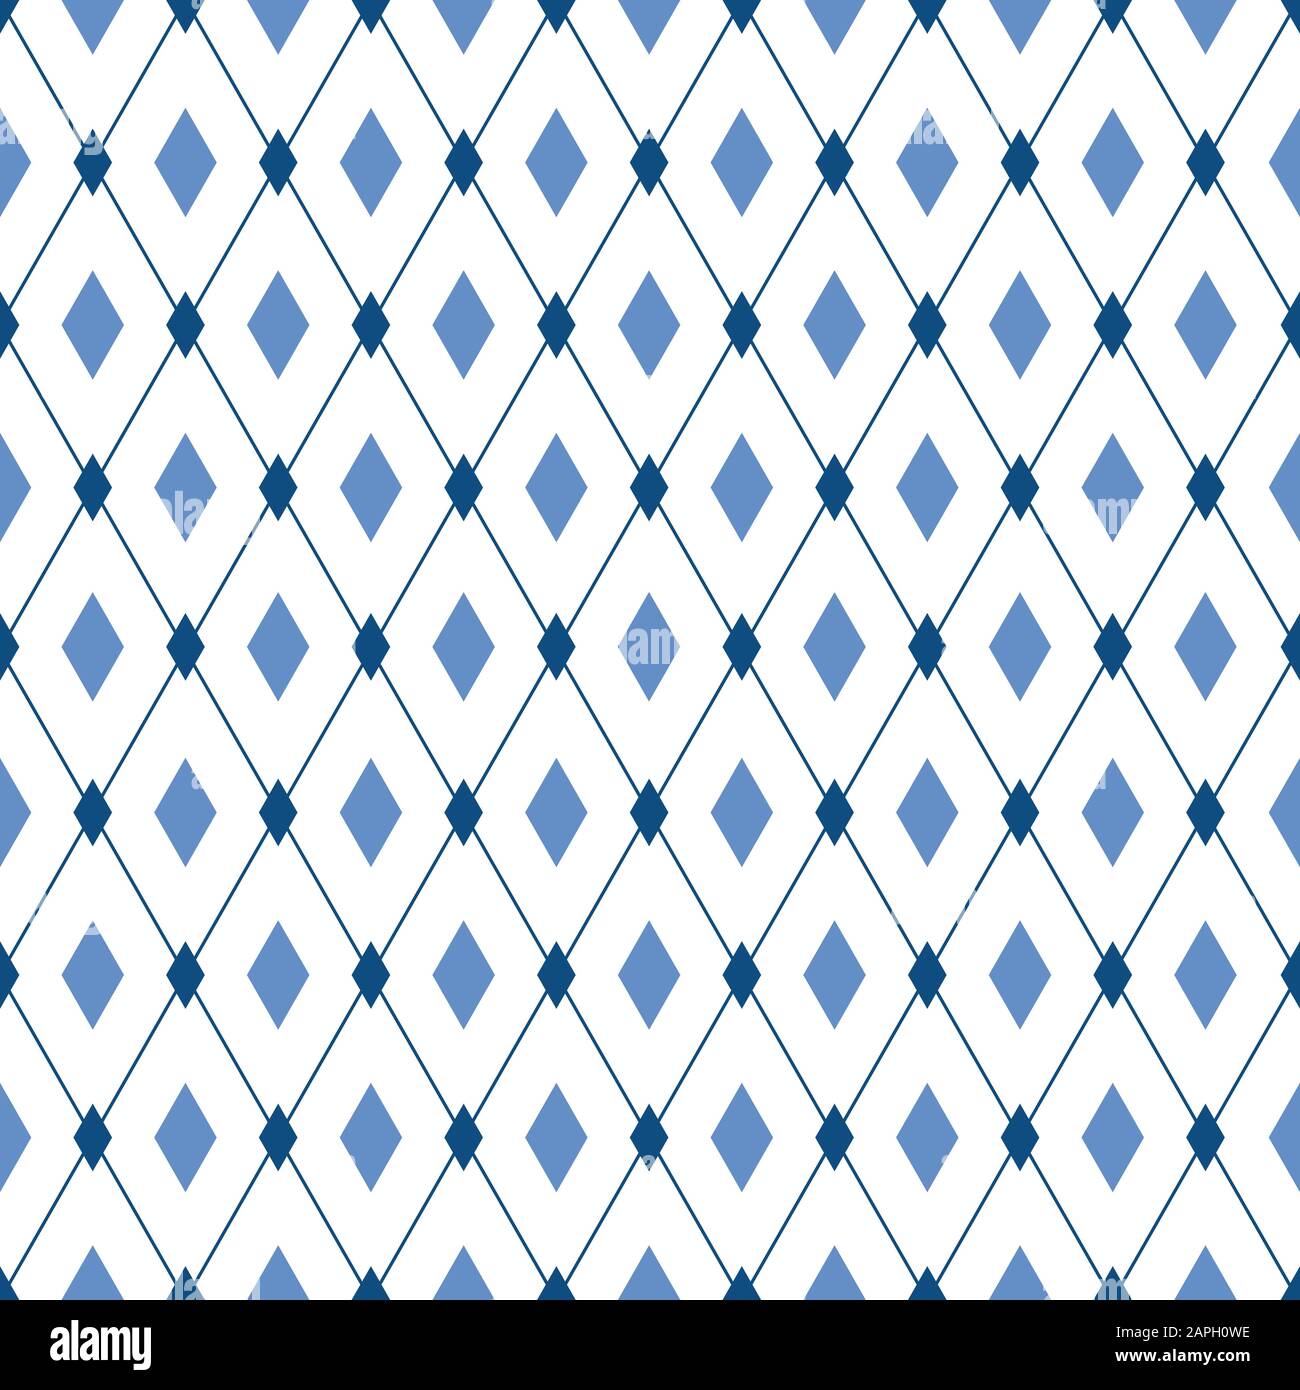 Blue diamonds vector seamless pattern. Male trendy elegant background. For wallpaper, fabric print, wrapping paper Stock Vector